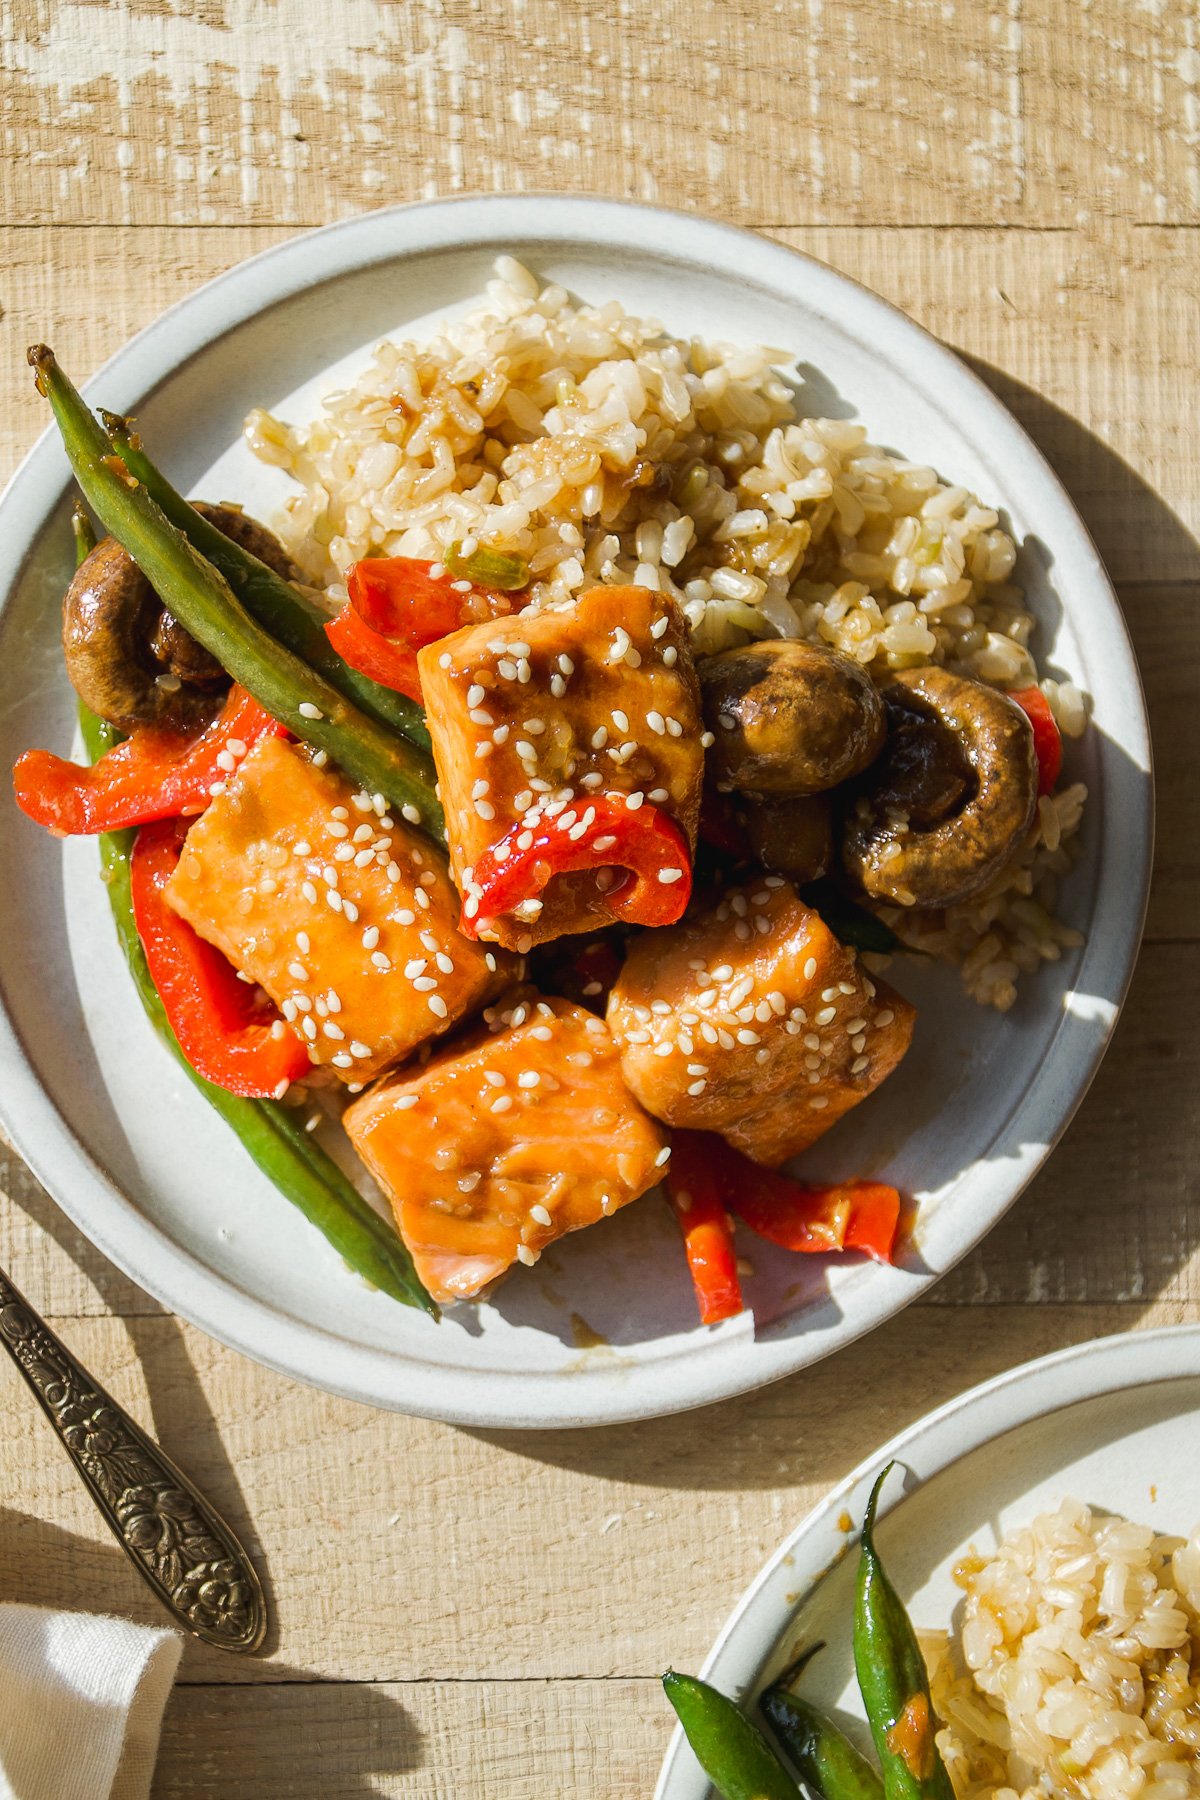 Overhead view of a plate with sesame salmon stir fry.